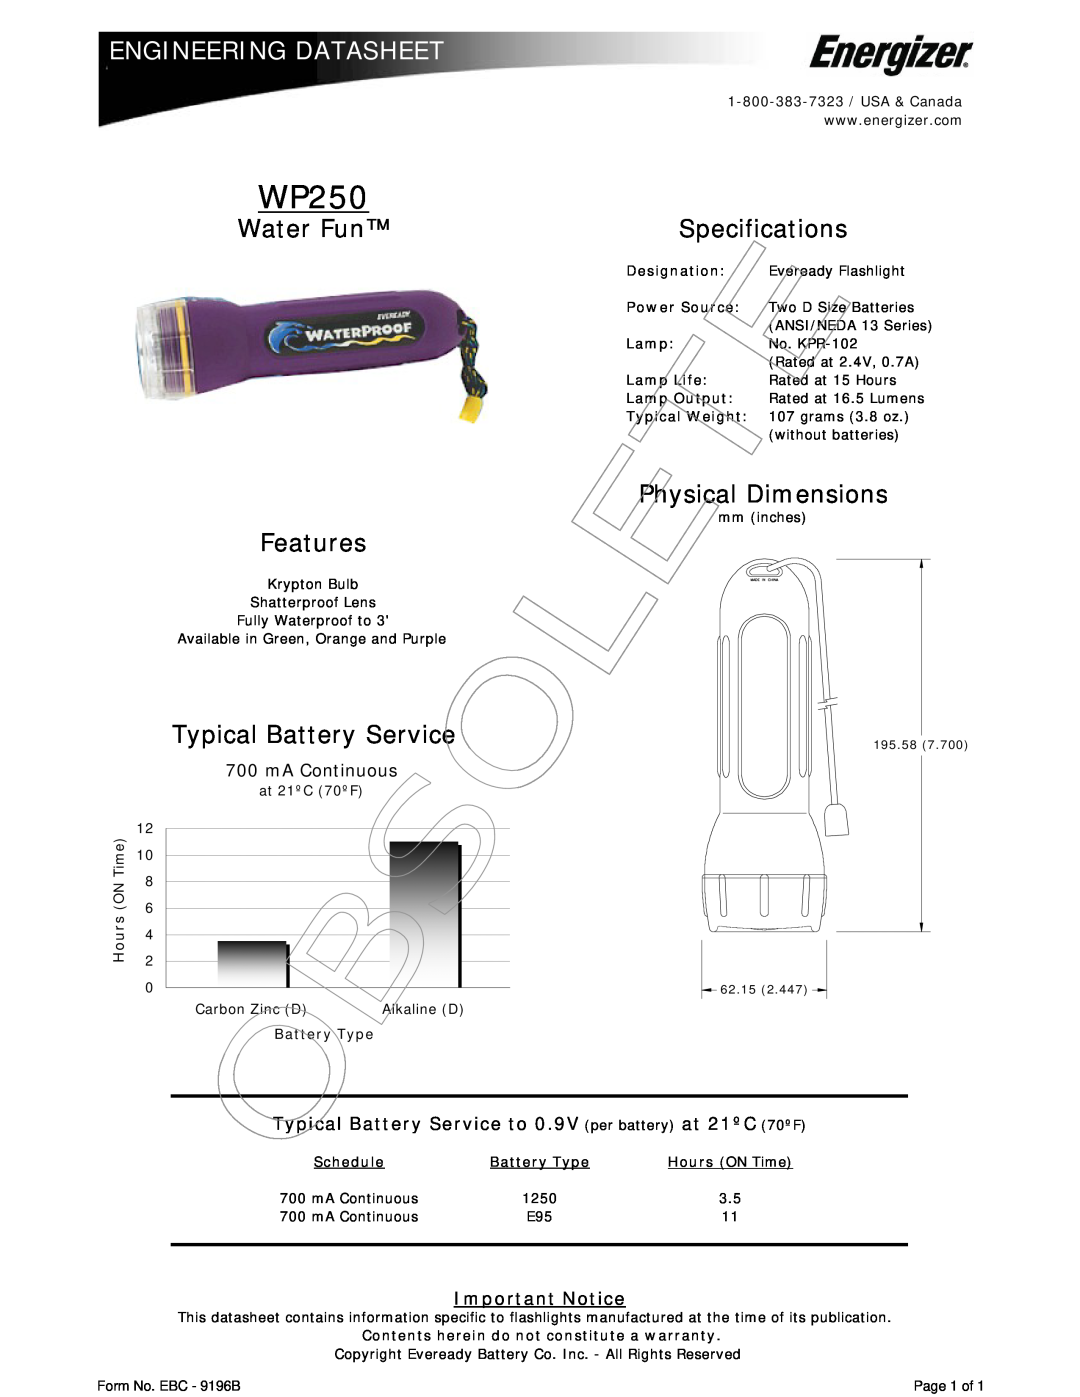 Energizer WP250 dimensions Engineering Datasheet, Water Fun, Specifications, Physical Dimensions, Features, mA Continuous 